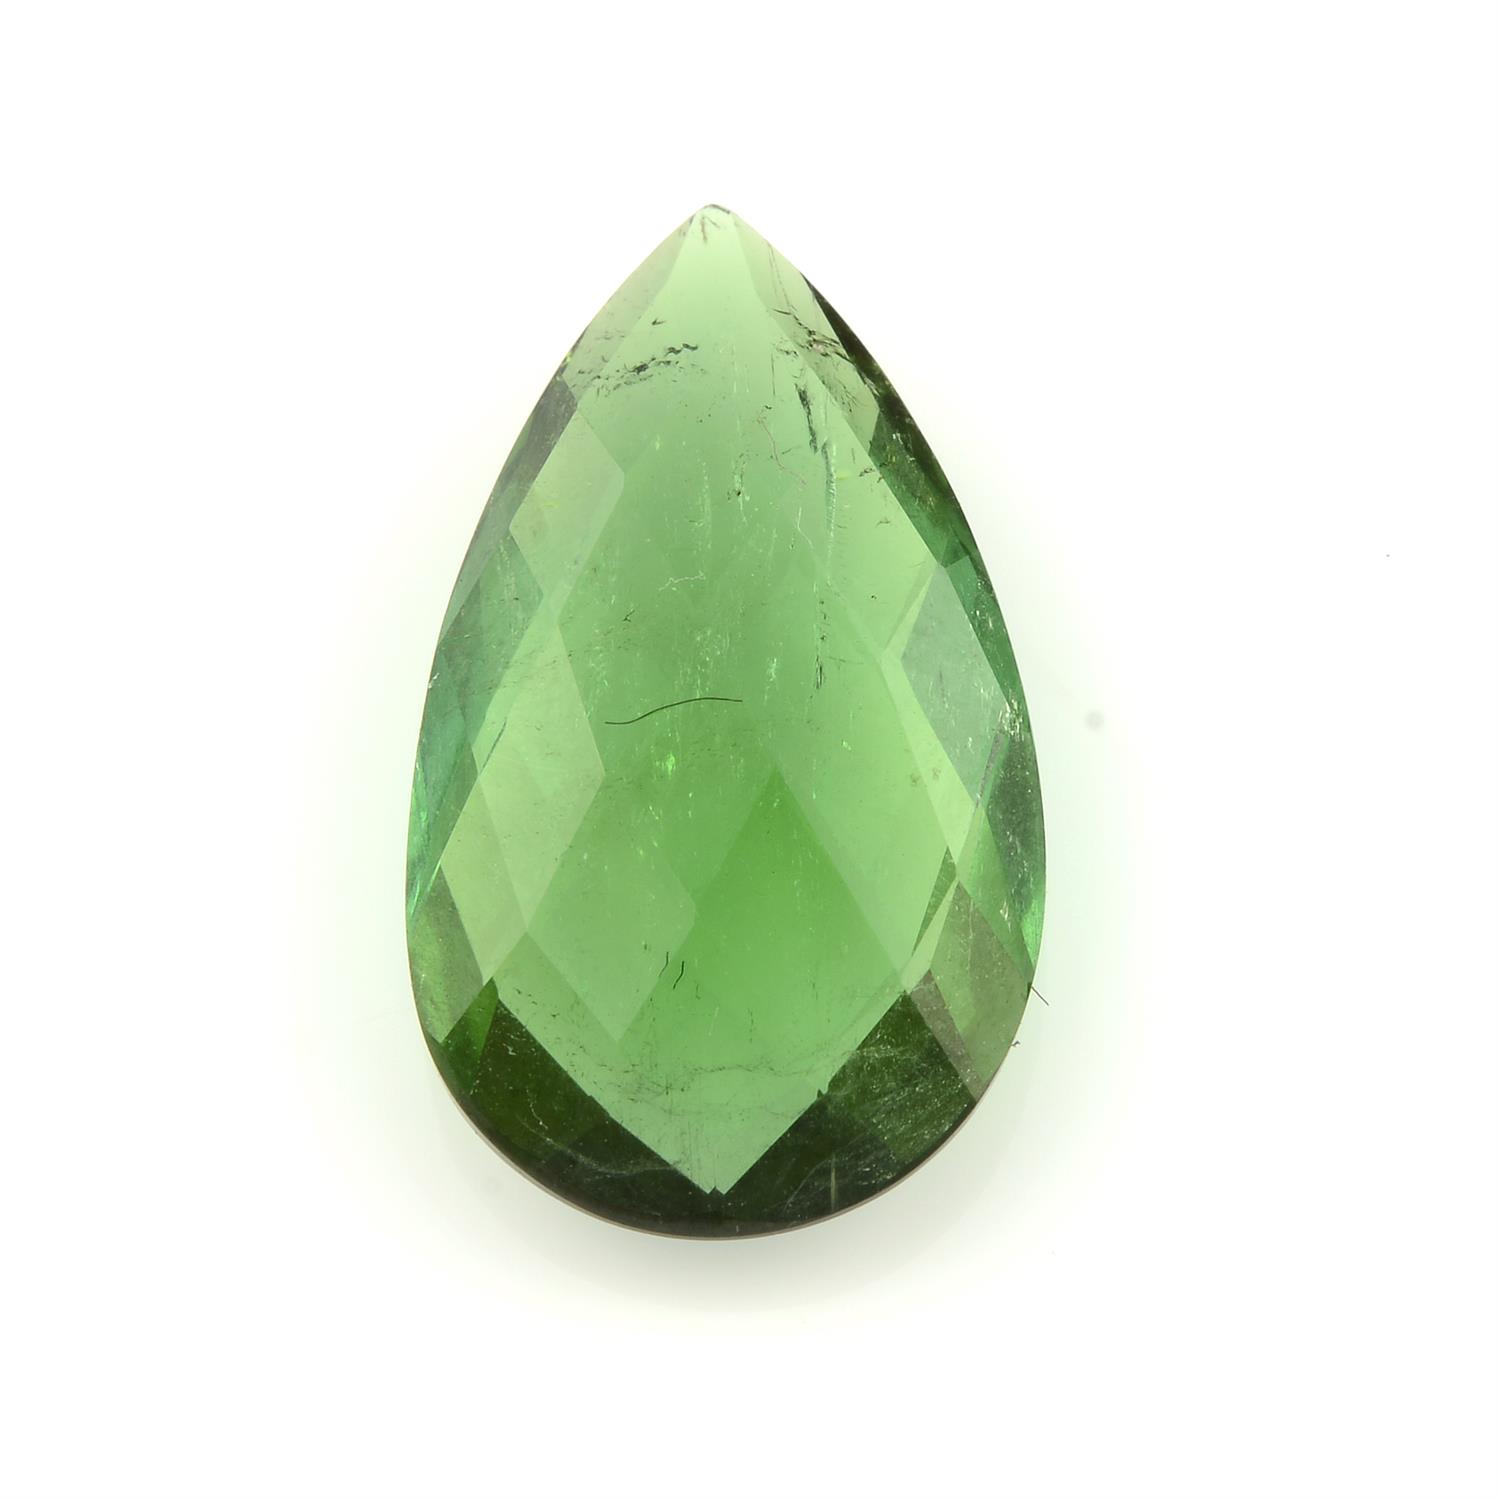 A pear-shape green tourmaline briolette, weight 4.46cts.